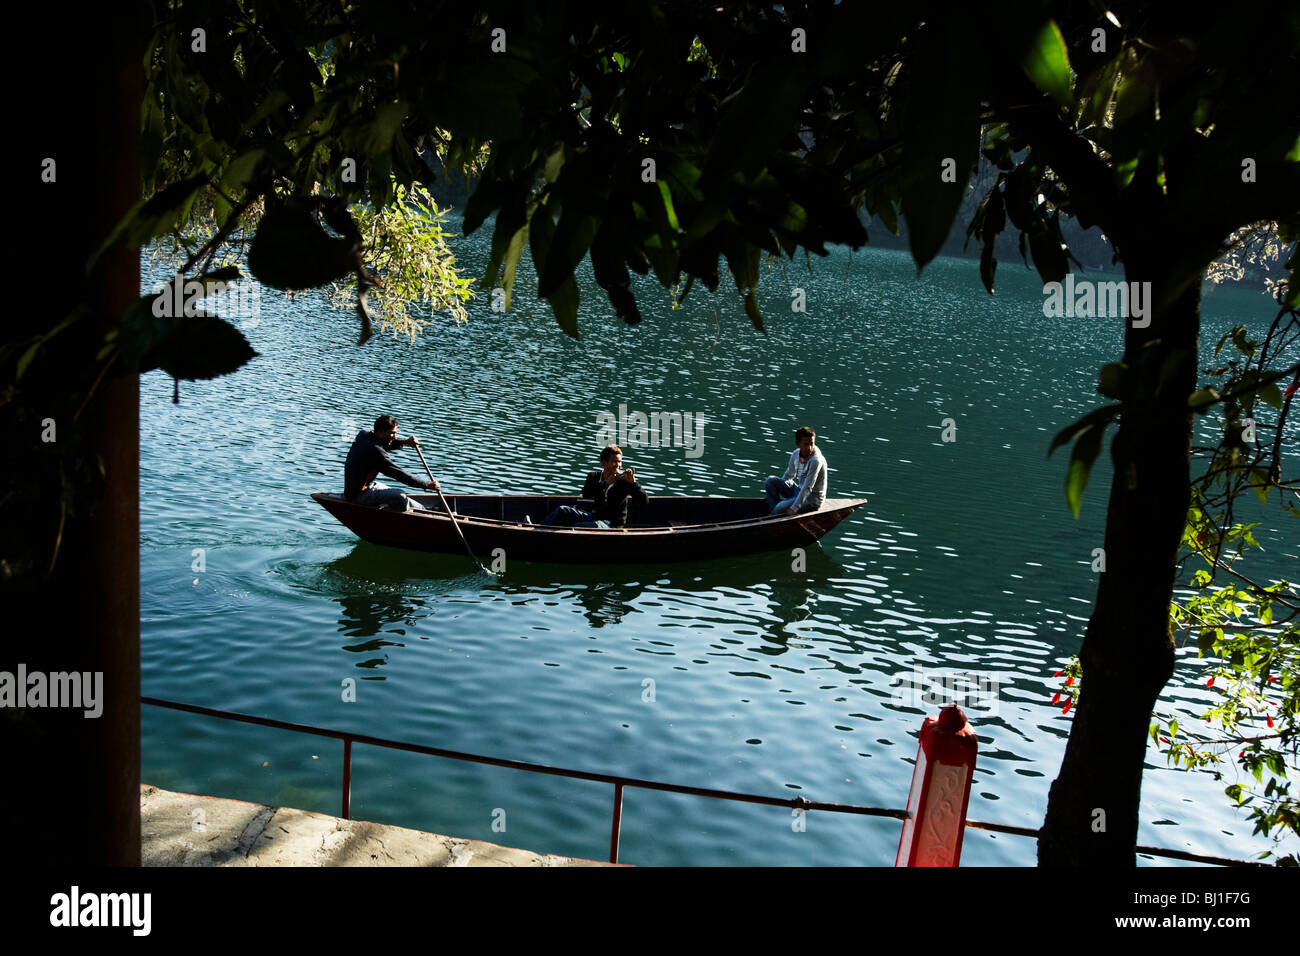 Tourists in a canoe on Pewha Lake in Pokhara, Nepal on Monday October 26, 2009. Stock Photo